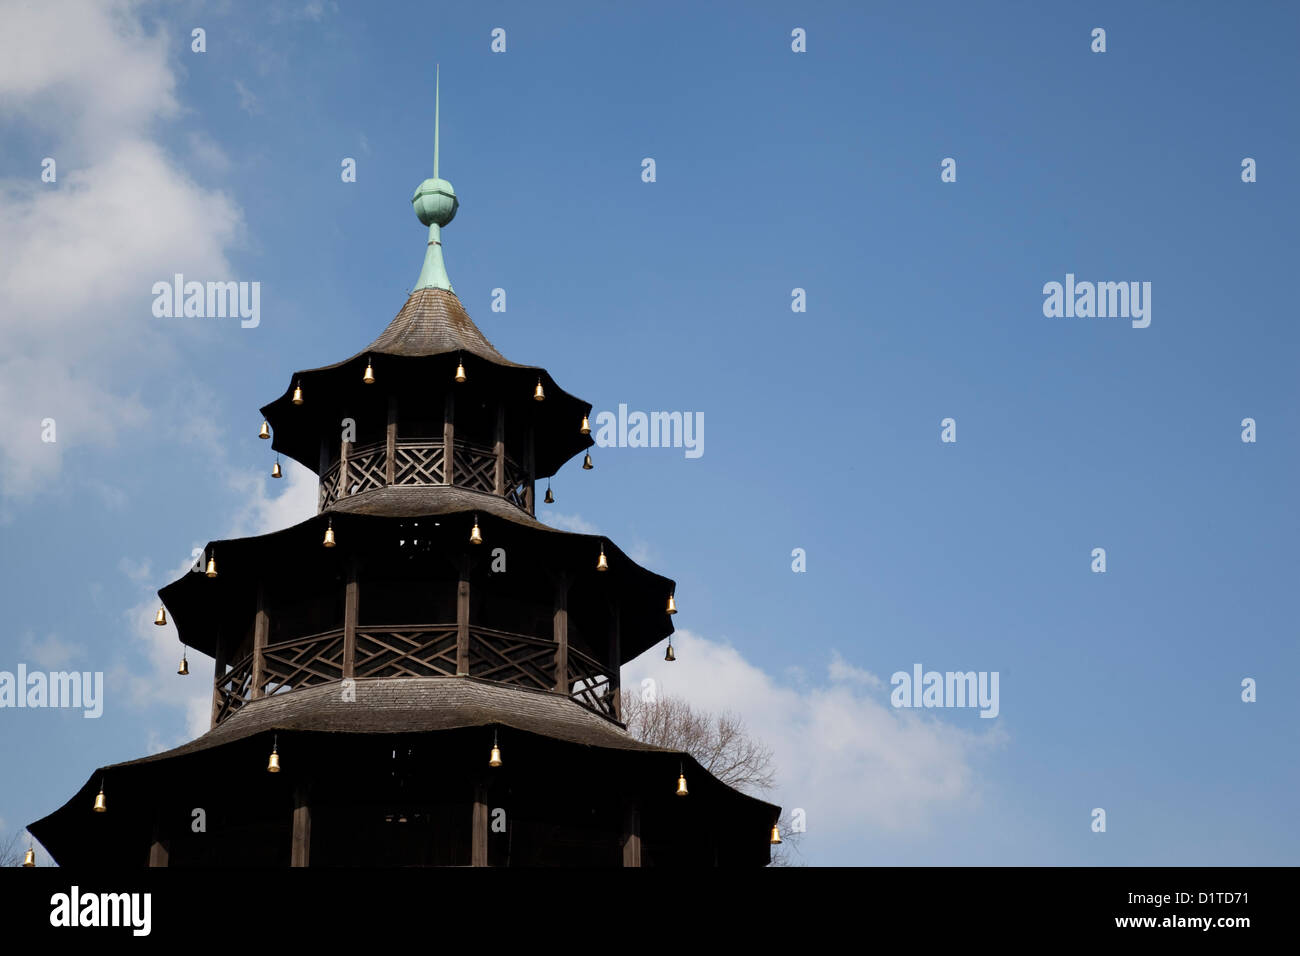 The Chinese Tower in the English Garden in Munich Germany is shown against a bright blue Bavarian sky. Stock Photo